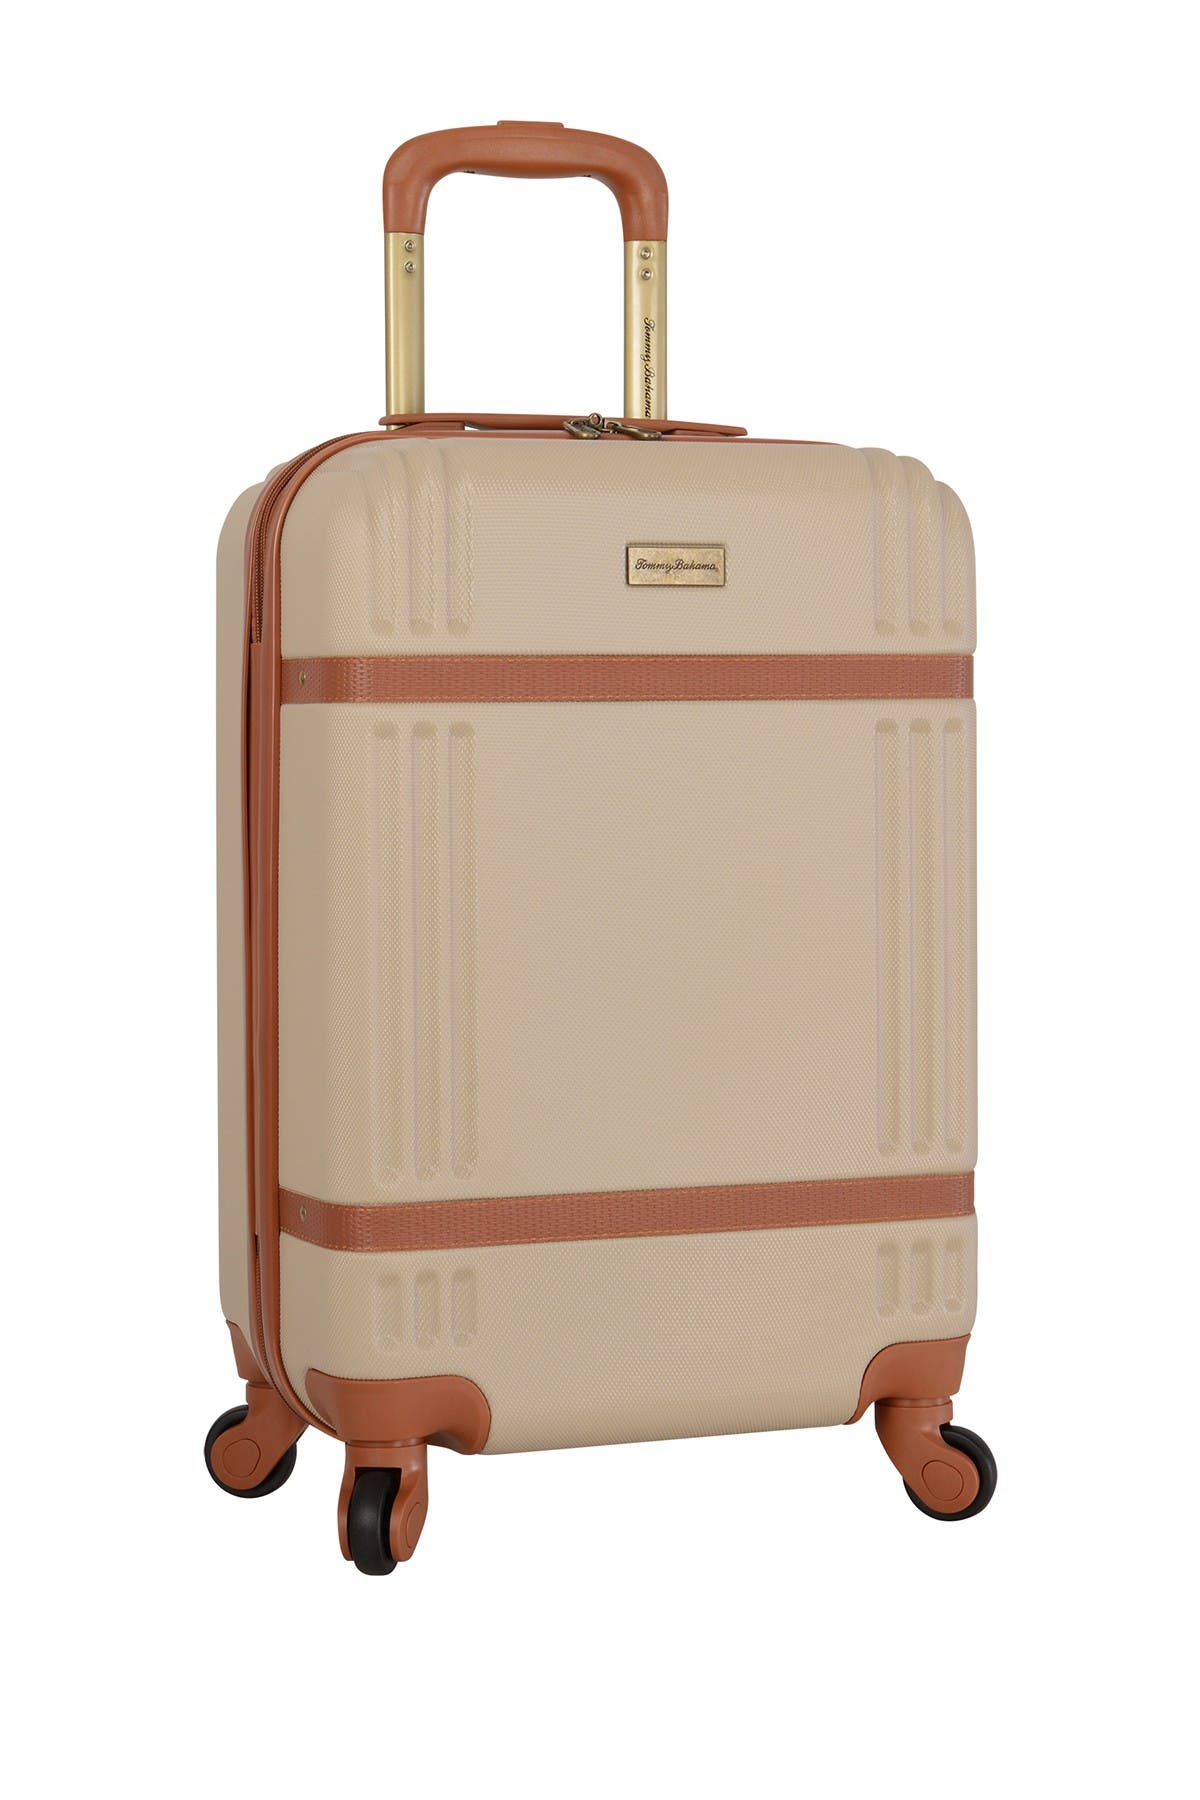 tommy bahama spinner luggage